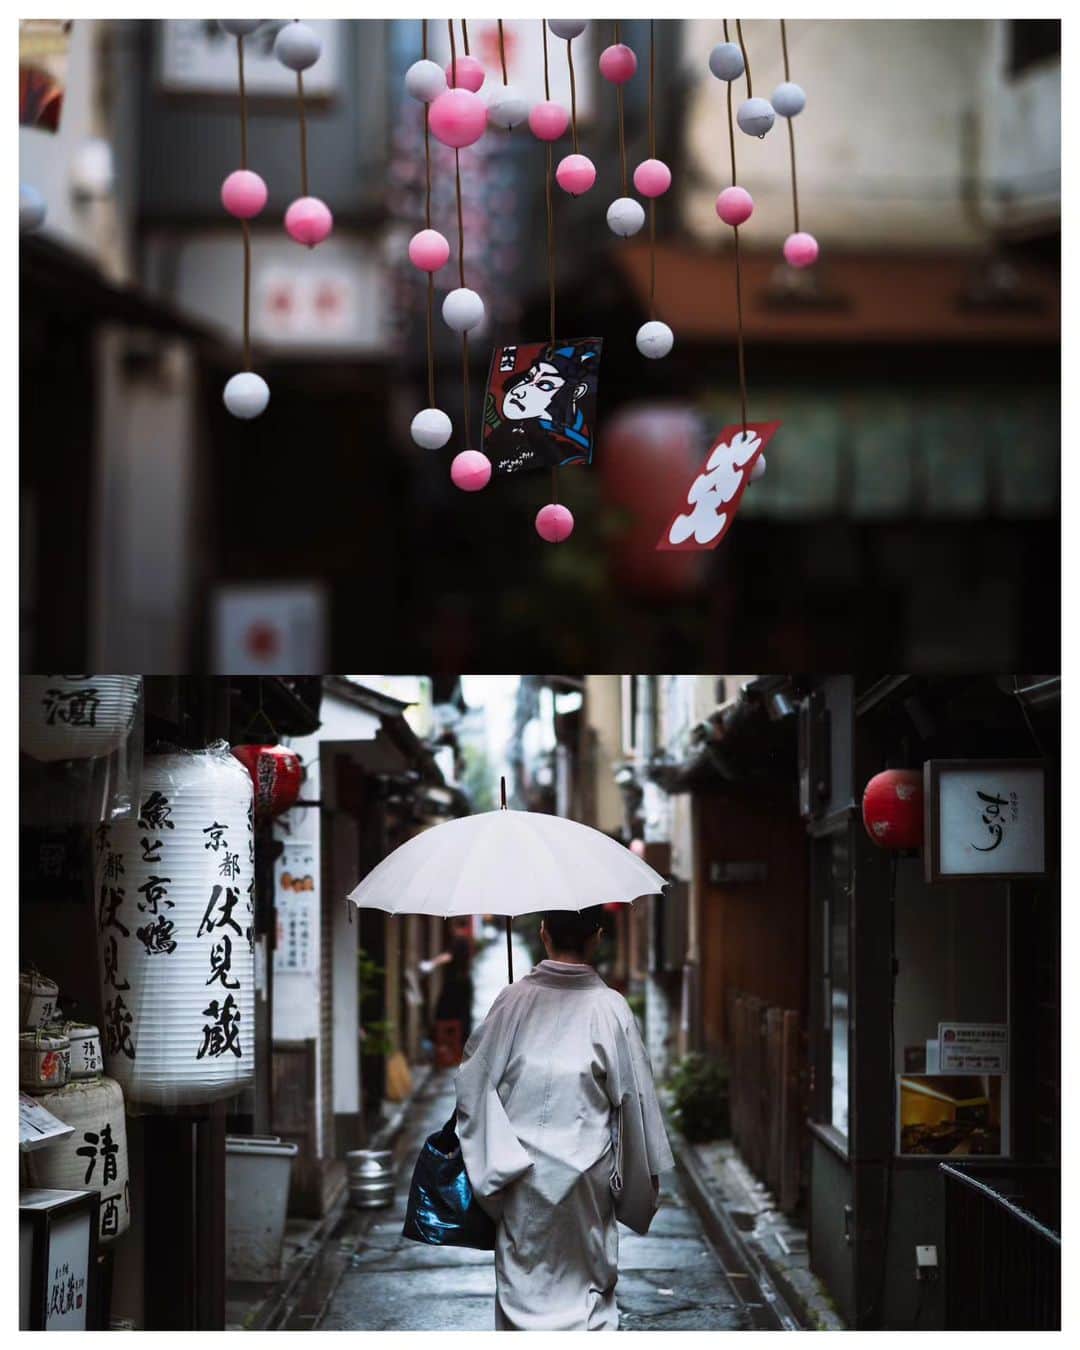 Takashi Yasuiのインスタグラム：「Lightroomプリセット「USETSU presets by Takashi Yasui」をリリースしました。あわせて制作の背景や、プリセットの解説記事も公開しています。ぜひプロフィールのリンクからチェックしてみてください。 #USETSUpresets  公式サイトで写真集「PERSONAL WORK」と同時購入すると20％オフとなります。また、以前に写真集を購入された方も、会計画面でクーポンコード「P601NAJWDA11」を入力していただくと20％オフとなります。  I've released the Lightroom preset, "USETSU presets by Takashi Yasui". Alongside this, I've also published articles detailing the background of its creation and an explanation about the presets. Please check it out via the link in my profile. #USETSUpresets  If you purchase the photobook "PERSONAL WORK" on the official site along with the presets, you will receive a 20% discount. Additionally, for those who have previously purchased the photobook, by entering the coupon code "P601NAJWDA11" at the checkout, you'll also get a 20% off.」